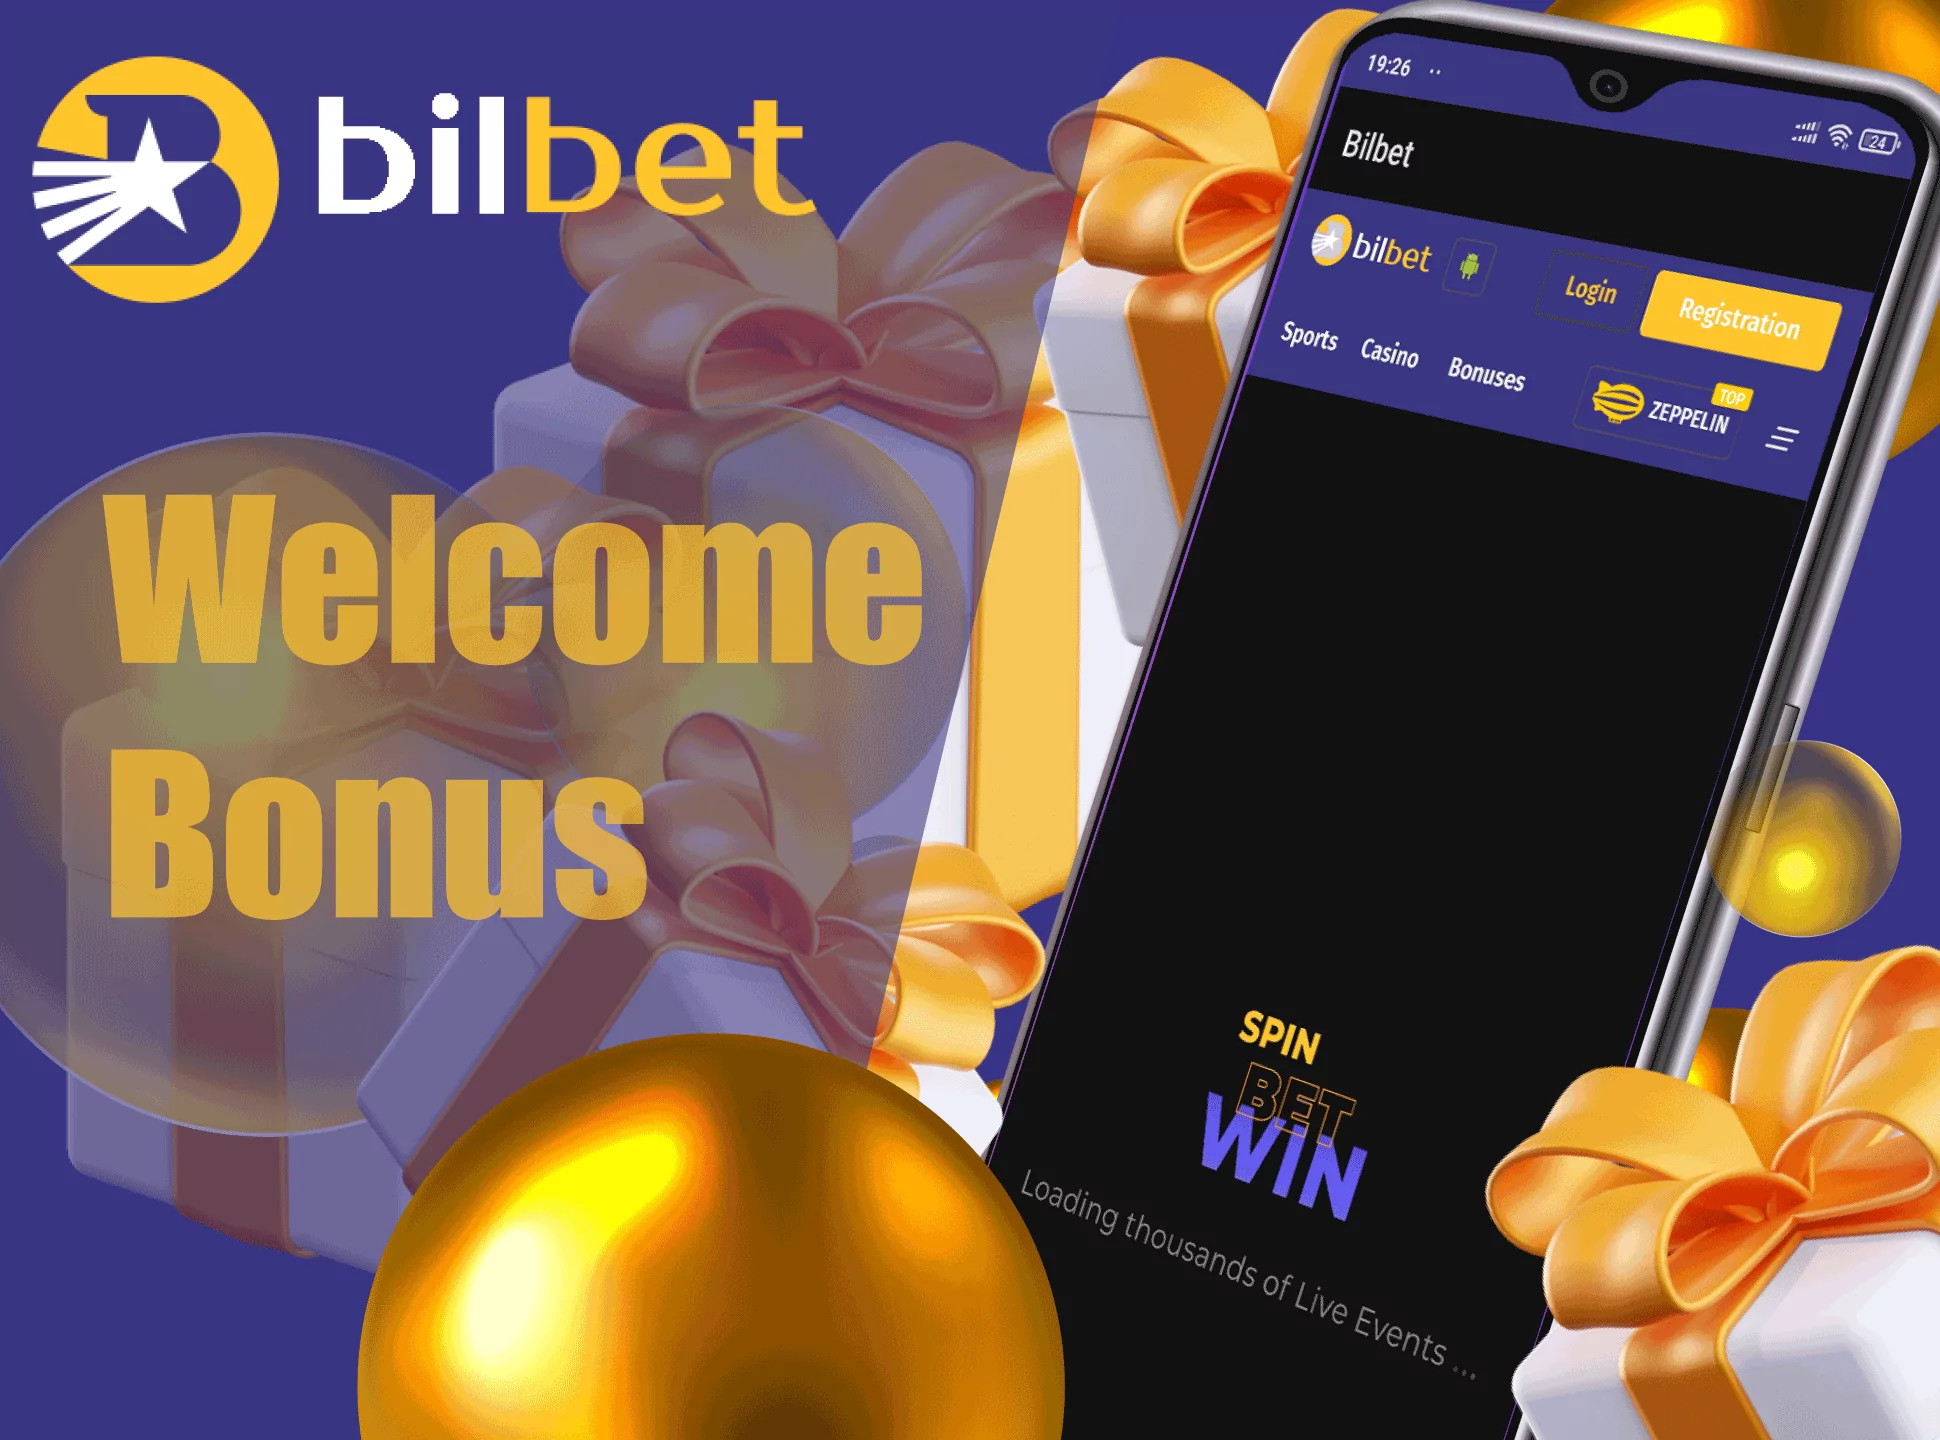 Bilbet welcome bonus is given you right after the first deposit.